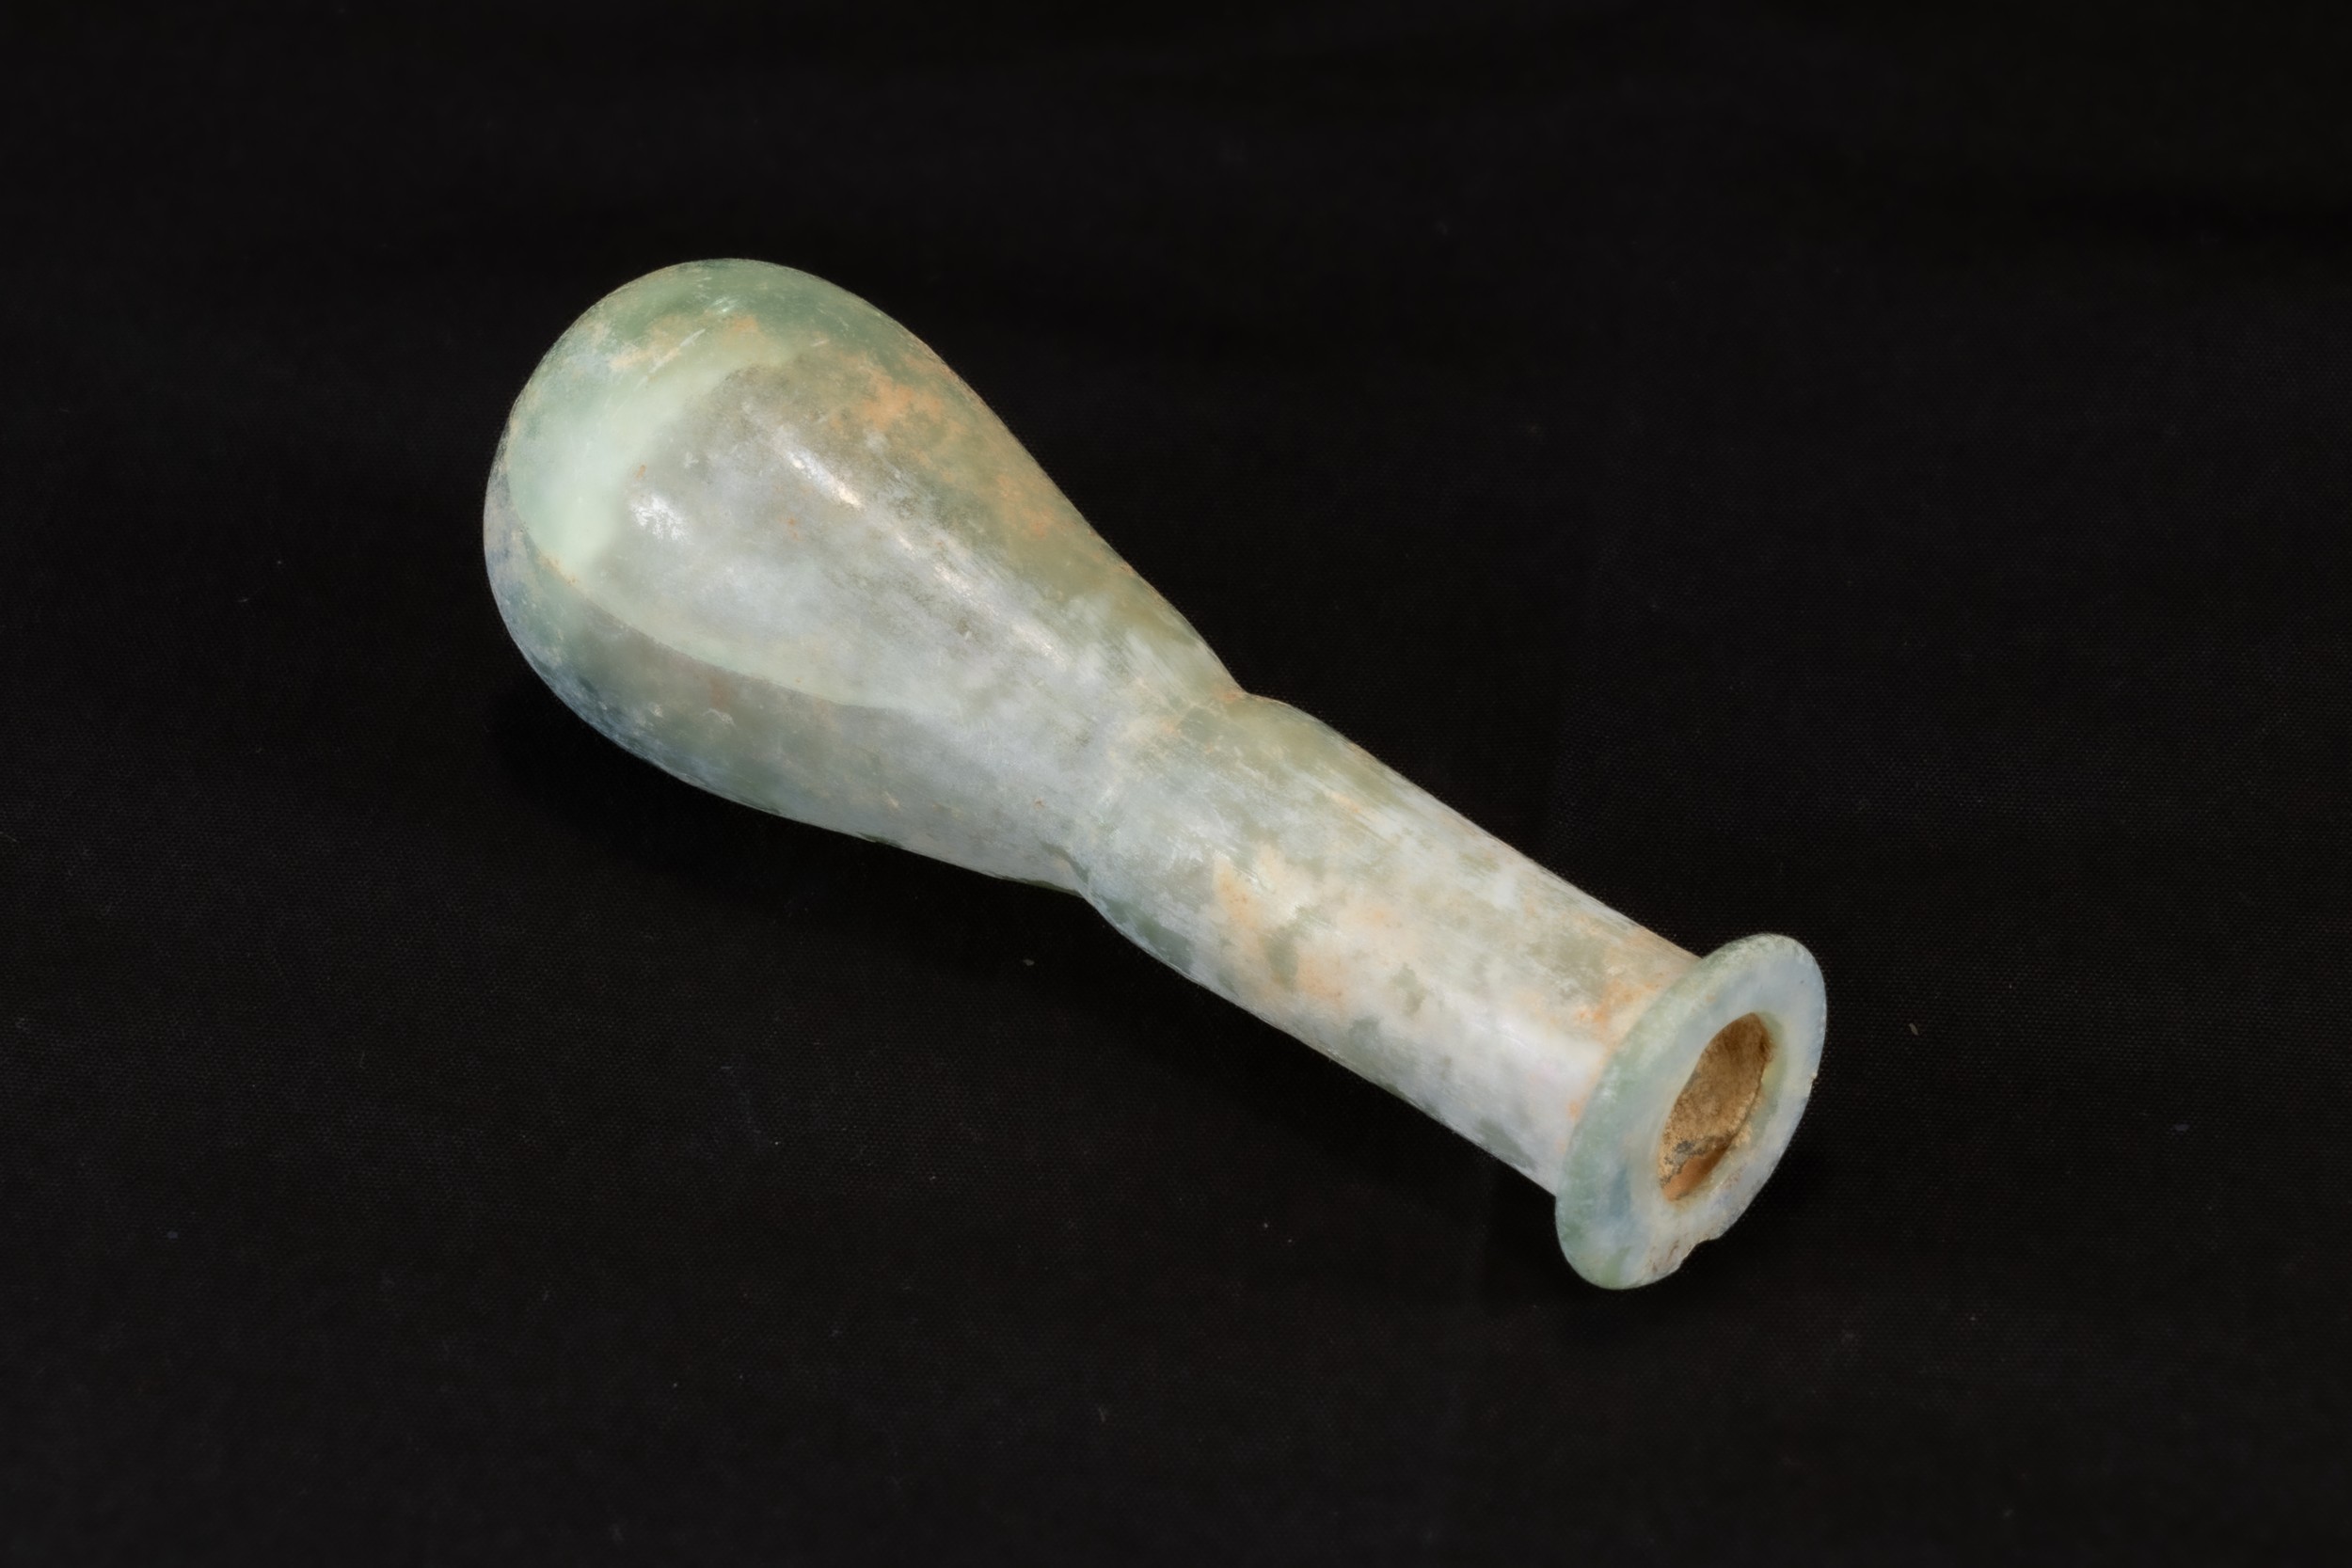 An Ancient Roman Glass Unguentarium Blown from Pale Translucent Glass with a Slight Teal Tint Circa  - Image 3 of 3